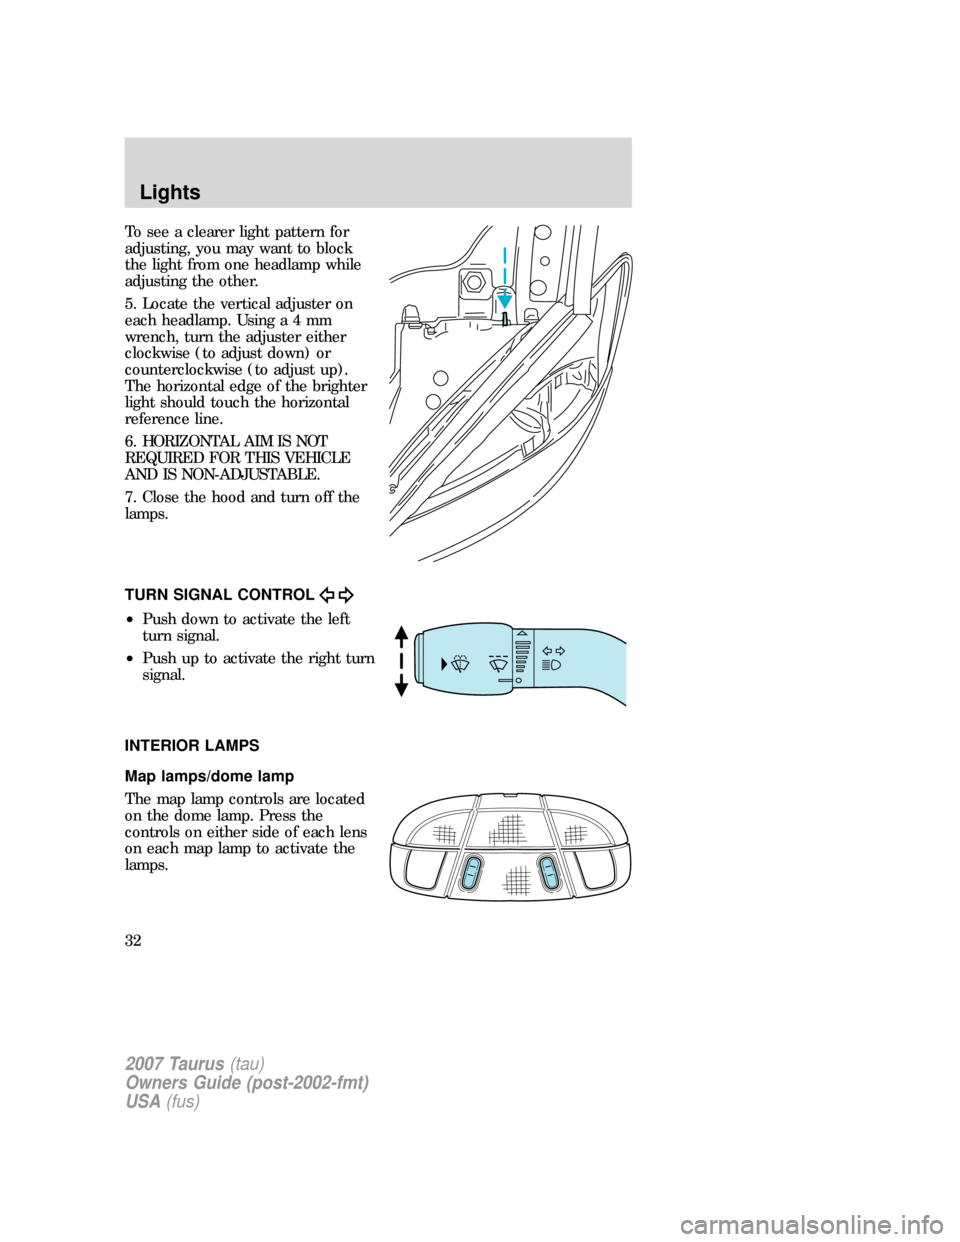 FORD TAURUS 2007 4.G Owners Guide To see a clearer light pattern for
adjusting, you may want to block
the light from one headlamp while
adjusting the other.
5. Locate the vertical adjuster on
each headlamp. Usinga4mm
wrench, turn the 